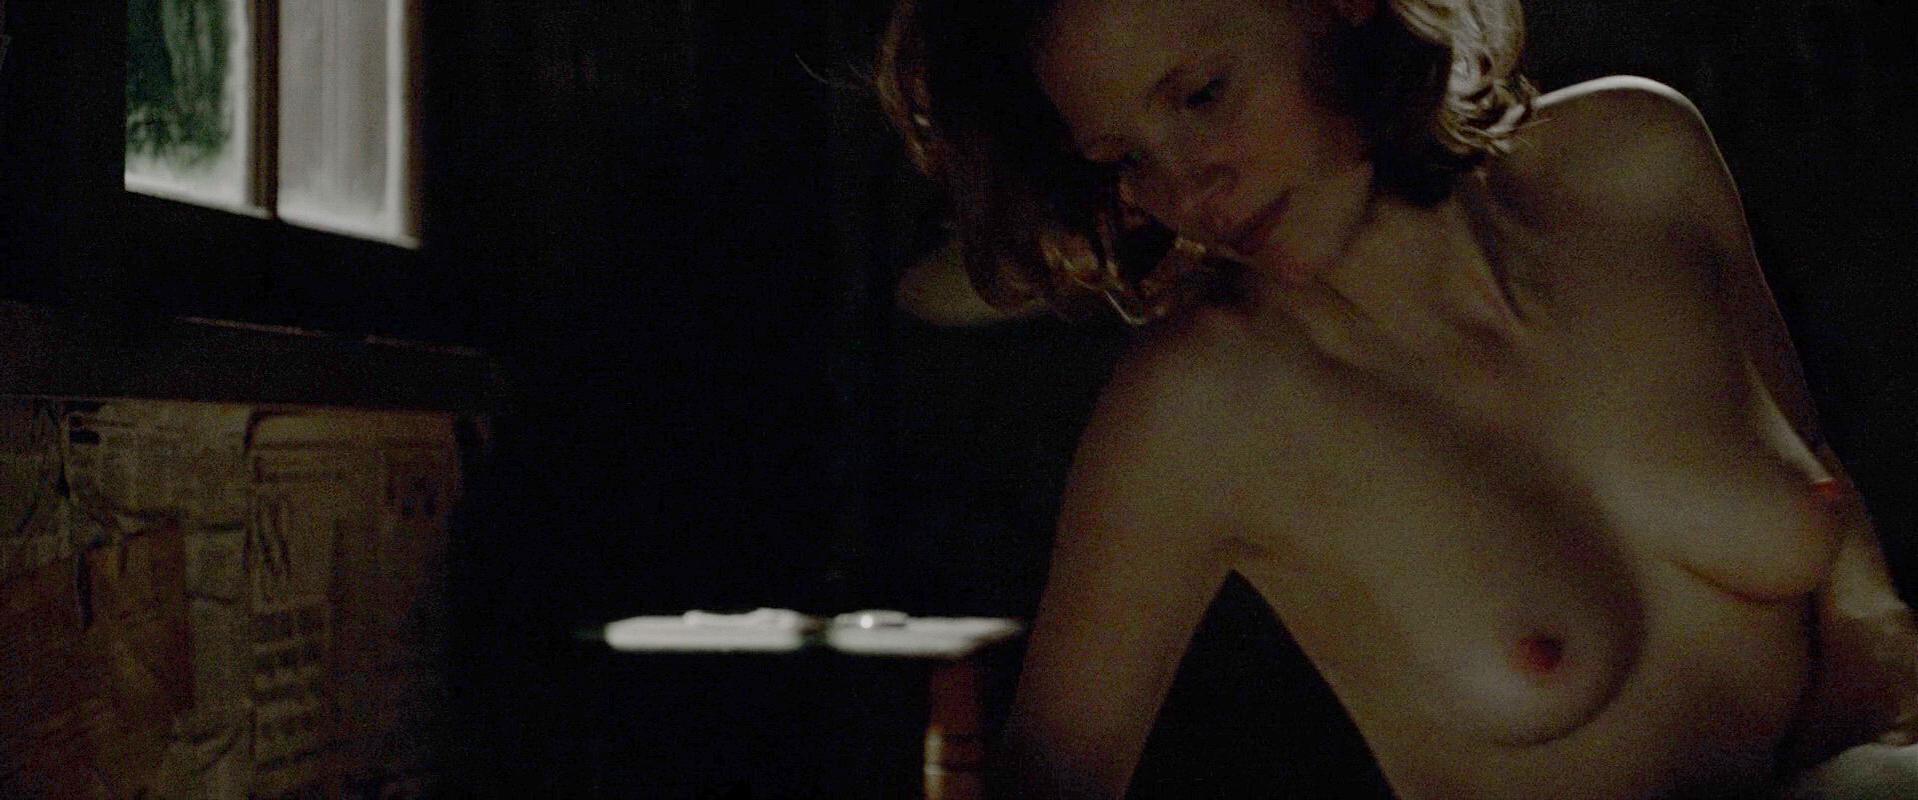 Jessica Chastain nude - Lawless (2012)